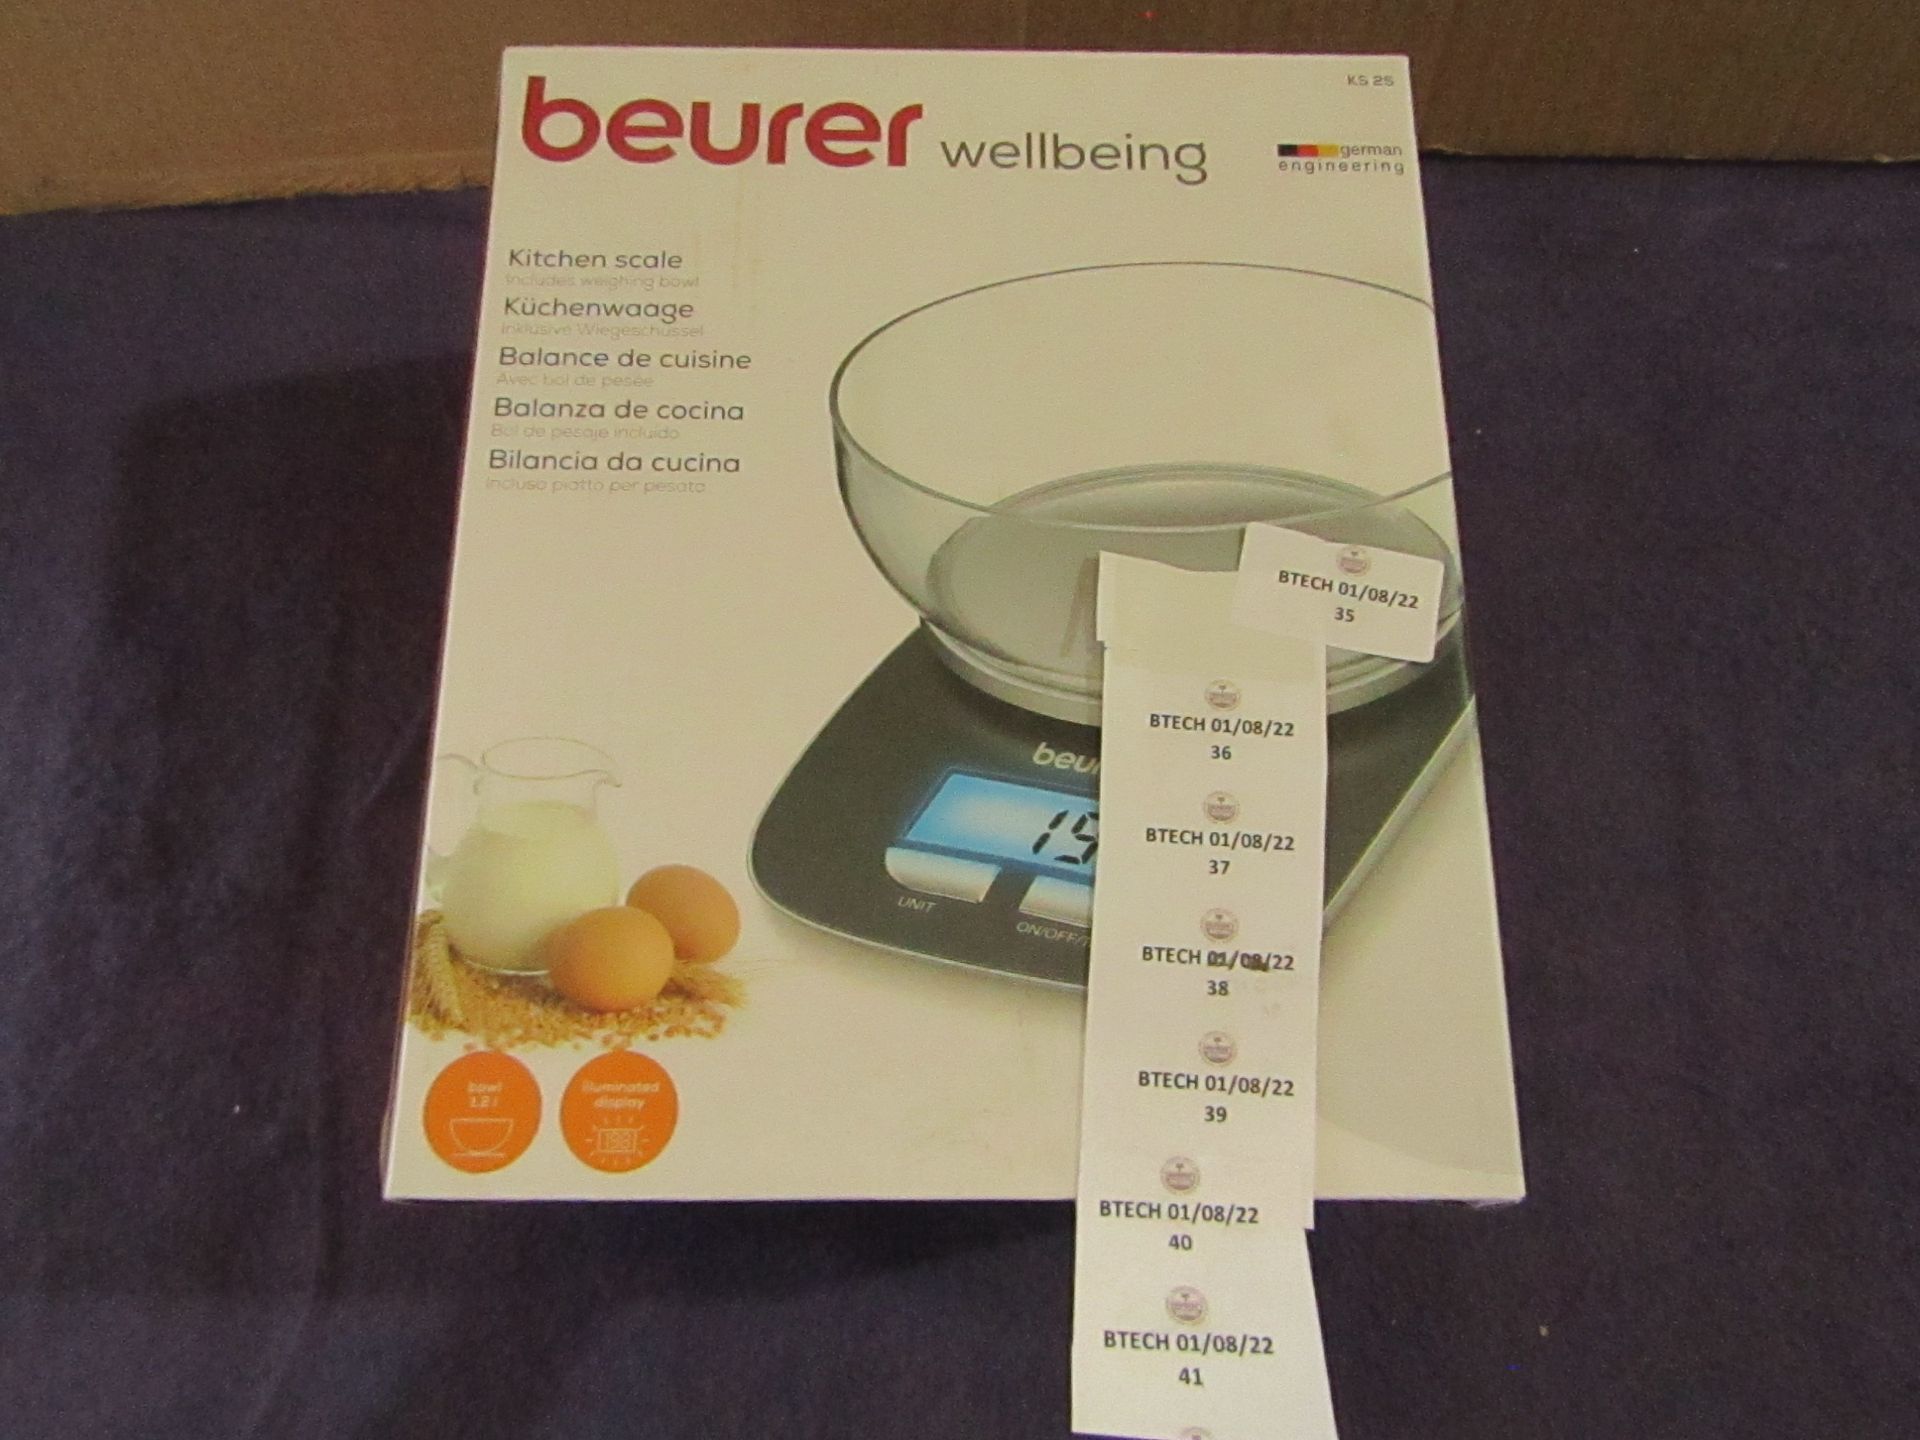 Beurer - Digital Kitchen Scale ( Includes Weighing Bowl ) - Looks In Good Condition. RRP £18.00 @